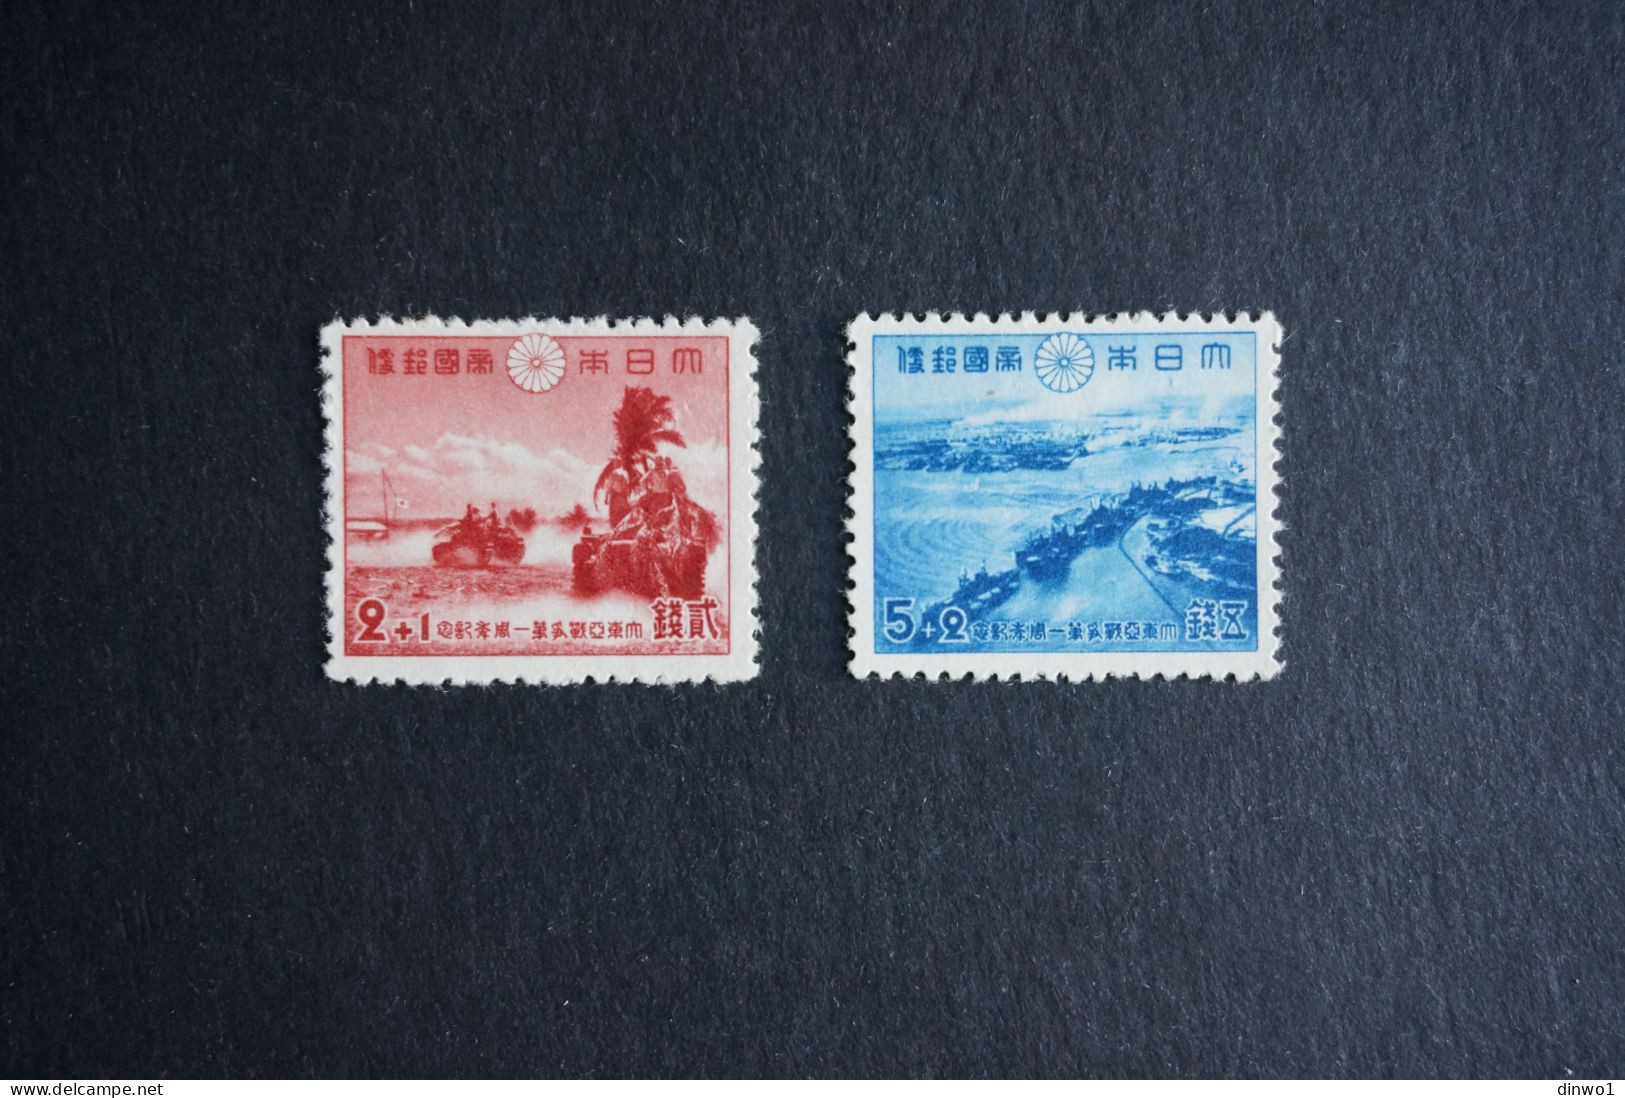 (T6) Japan 1942 1st Anniv. Of East Asia War - PEARL HARBOR Attack (No Gum) - Unused Stamps